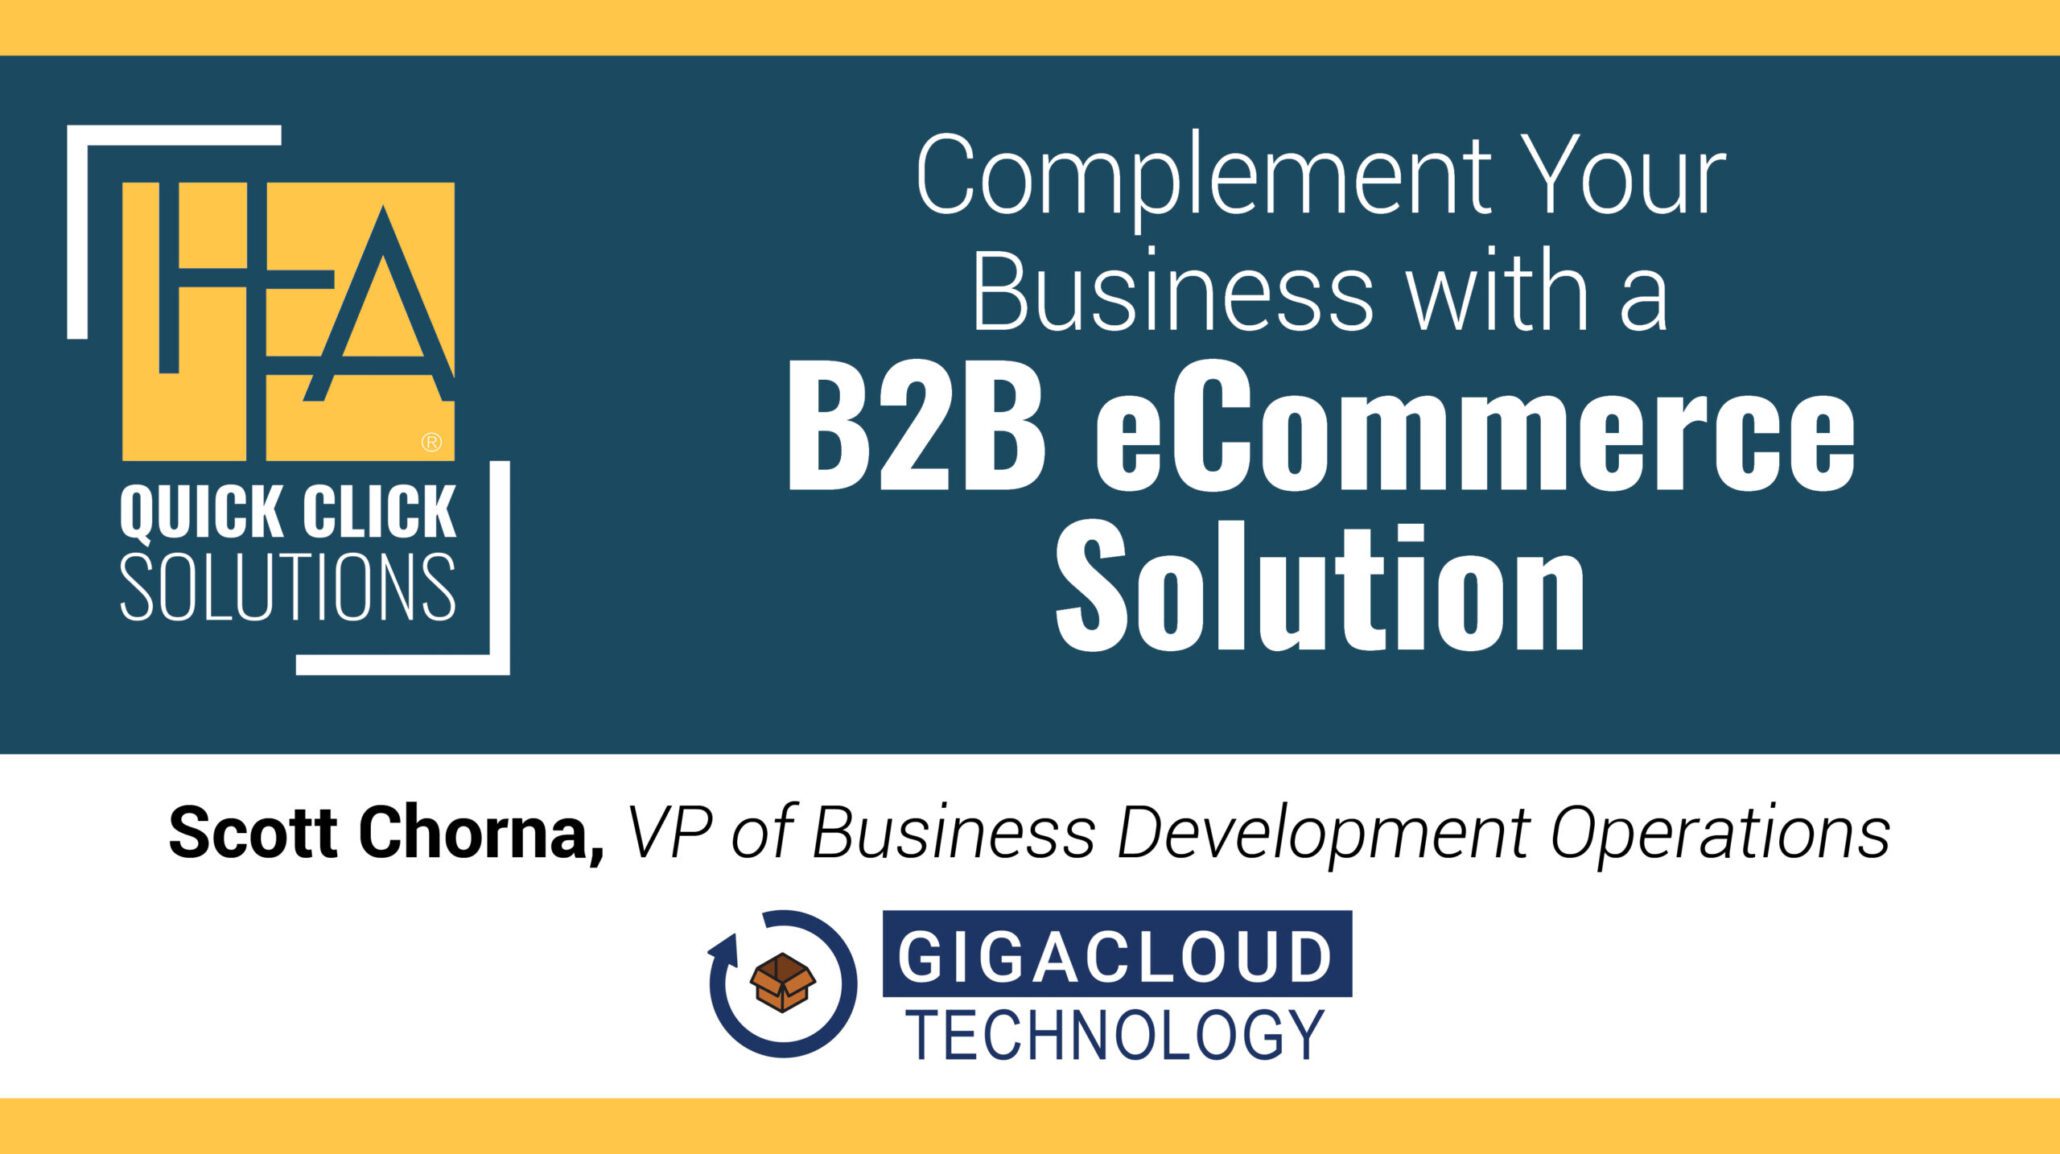 HFA-QCS_Complement Your Business with a B2B eCommerce Solution